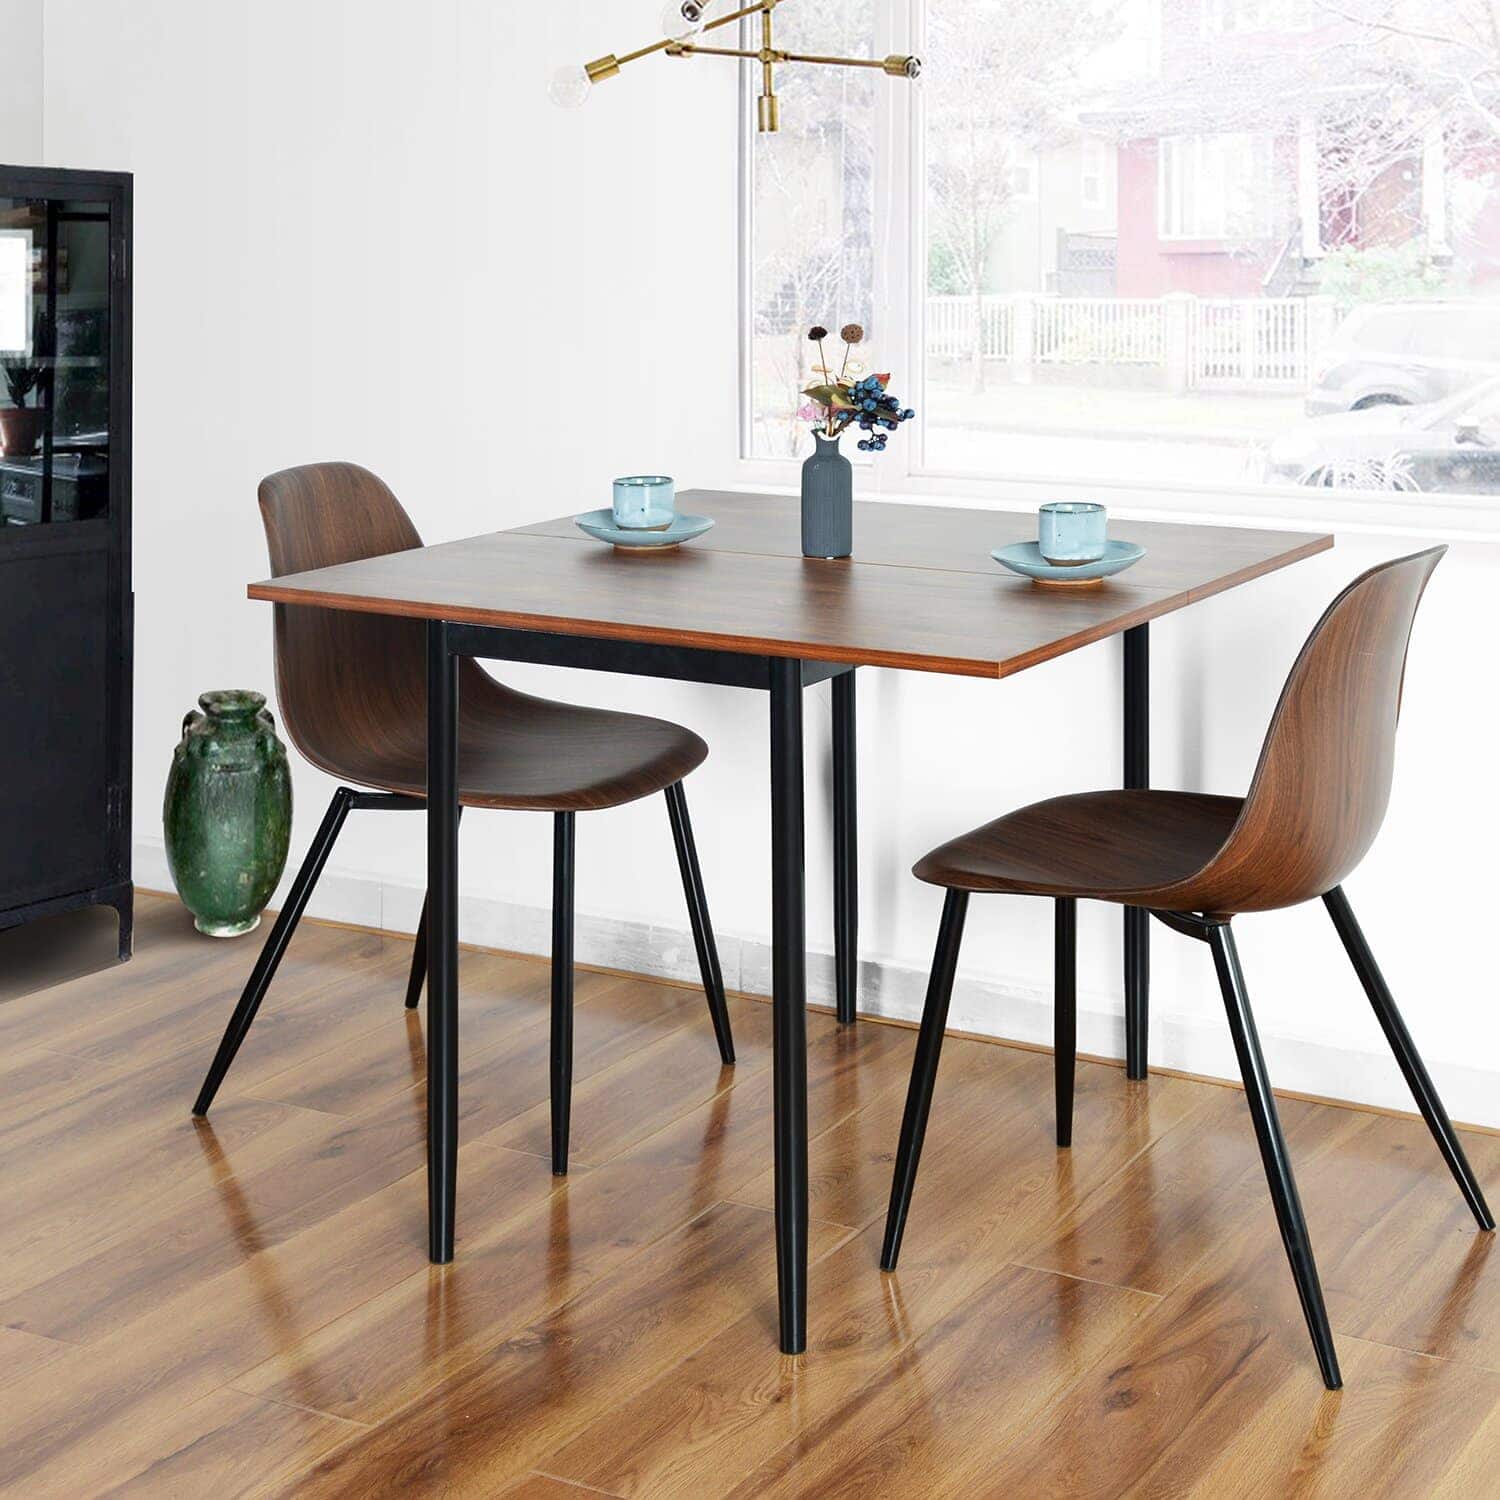 20 Dining Tables Ideas For Small Spaces, Small Dining Room Tables